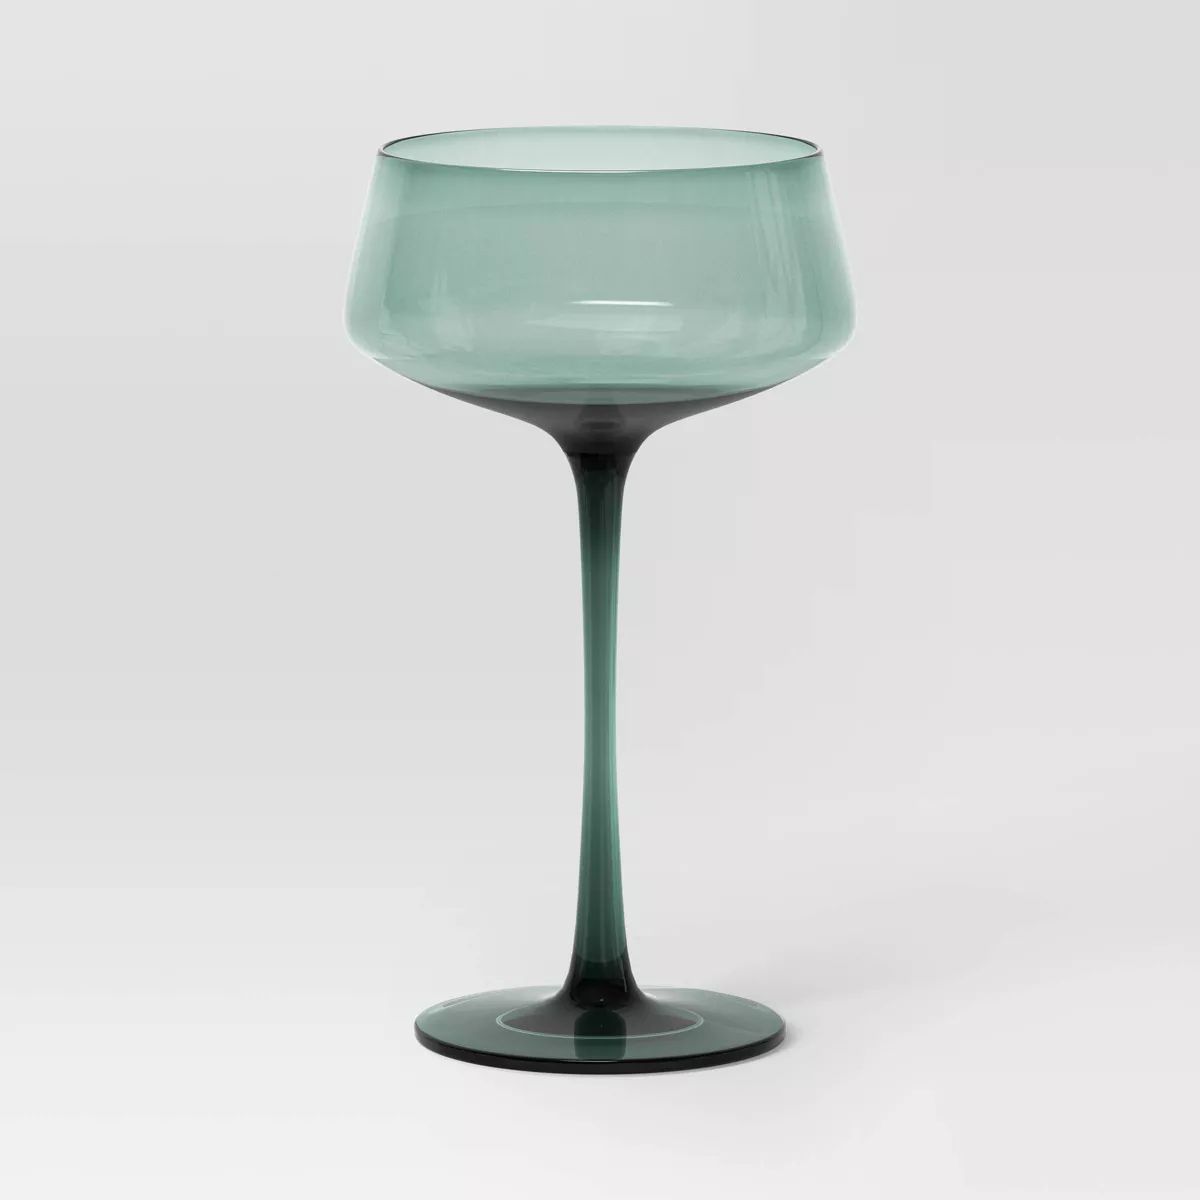 9.8oz Cocktail Coupe Glass - Threshold™ | Target